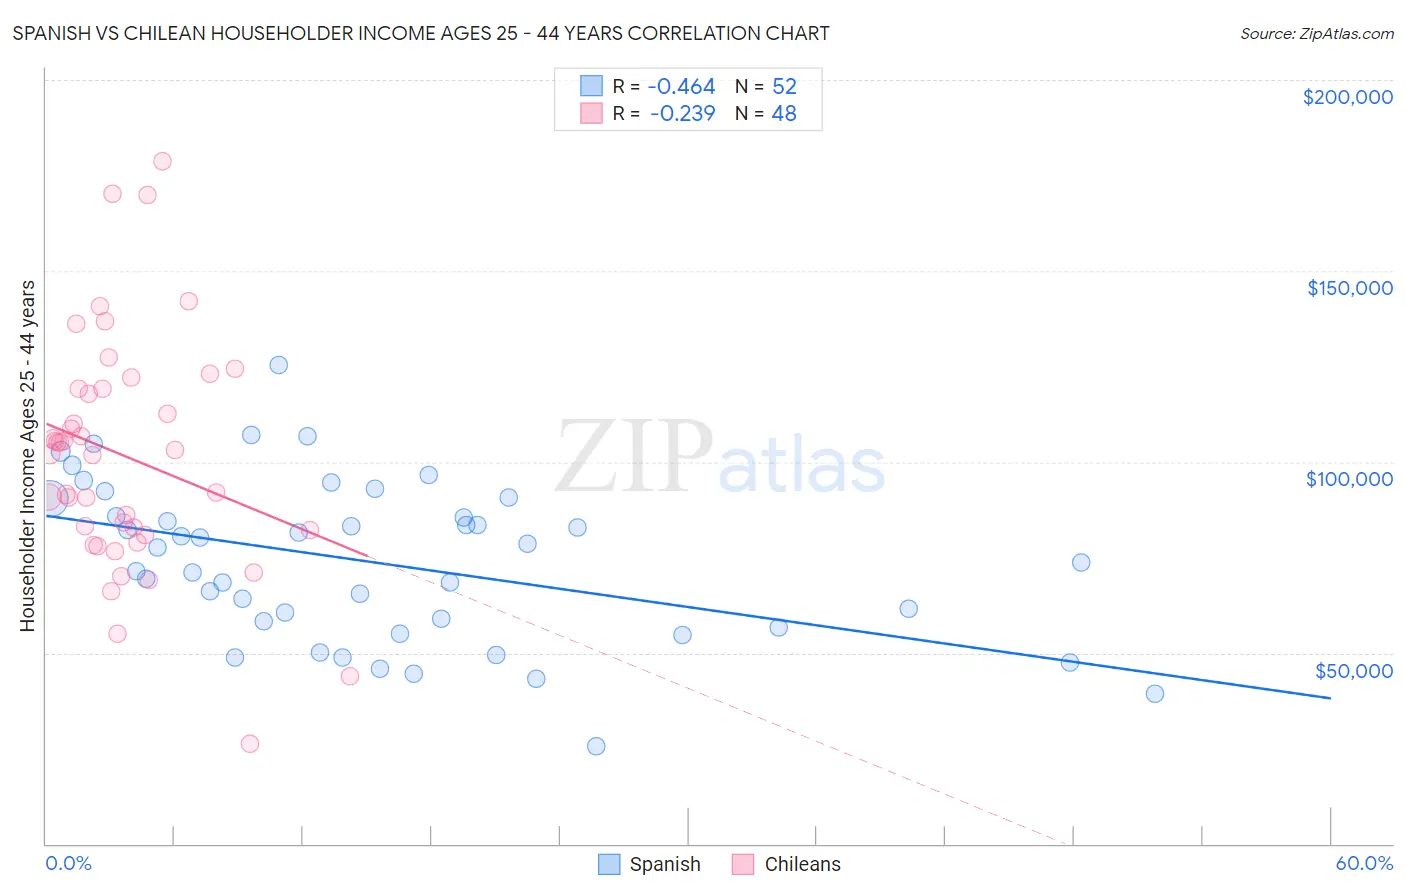 Spanish vs Chilean Householder Income Ages 25 - 44 years